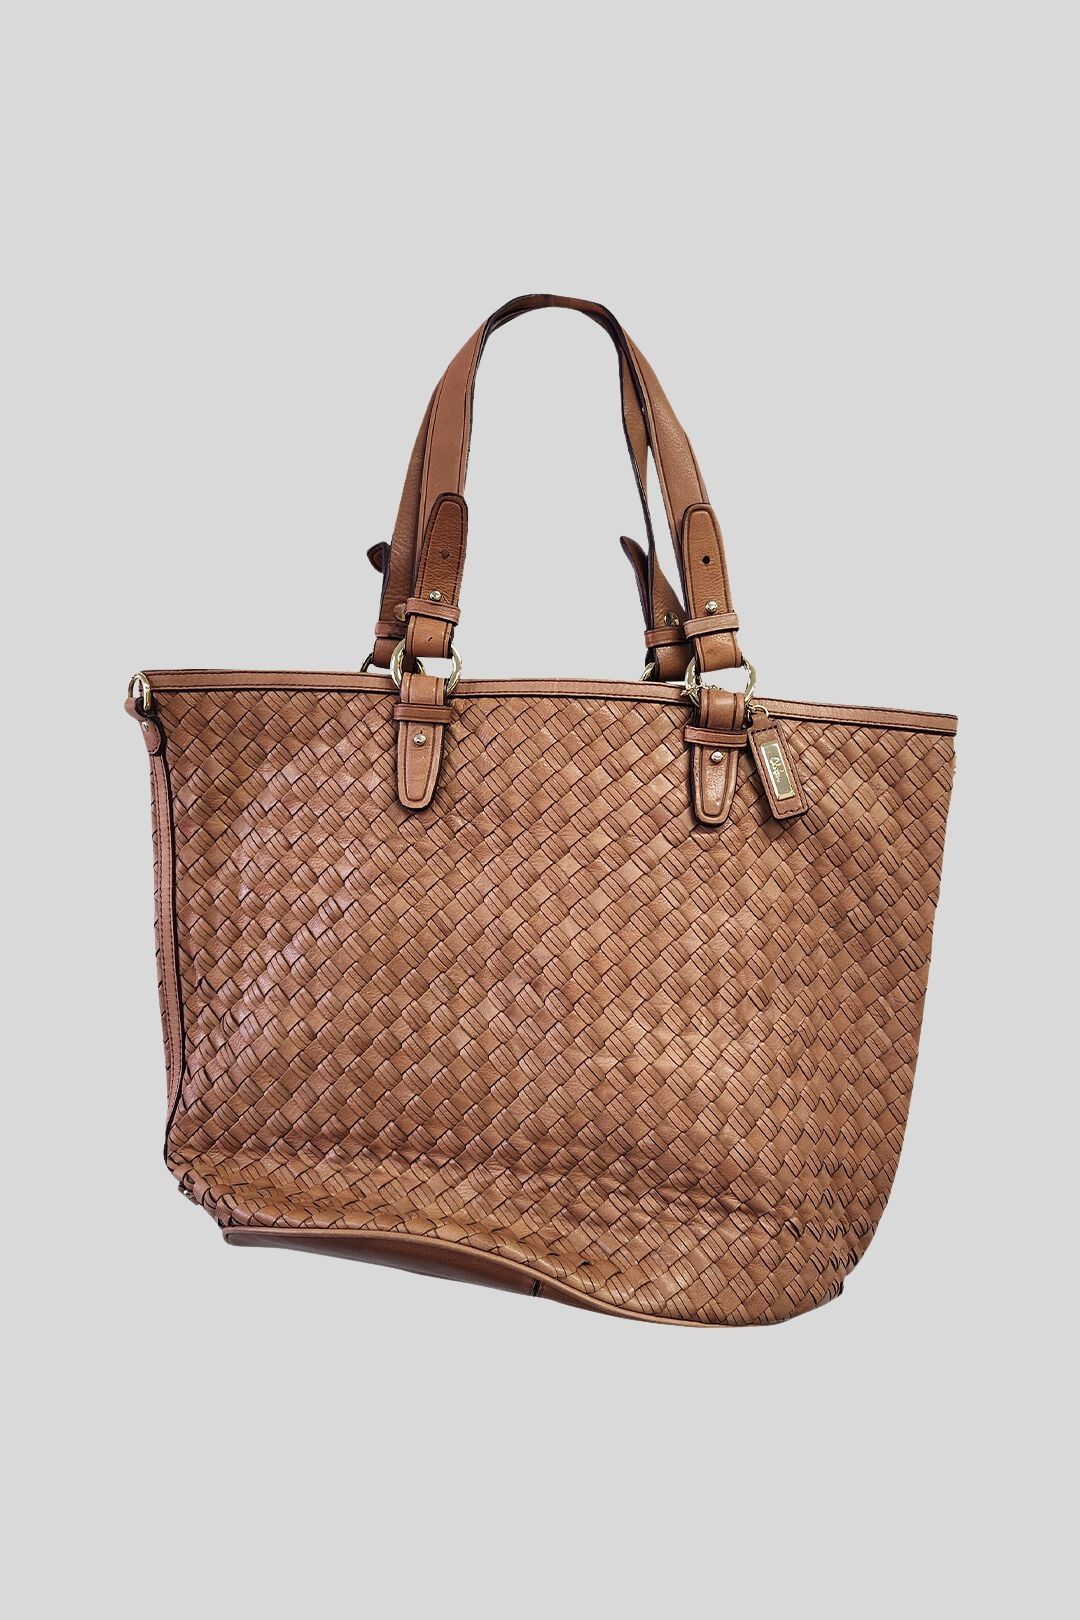 Cole Haan Tan Woven Tote Leather Bag